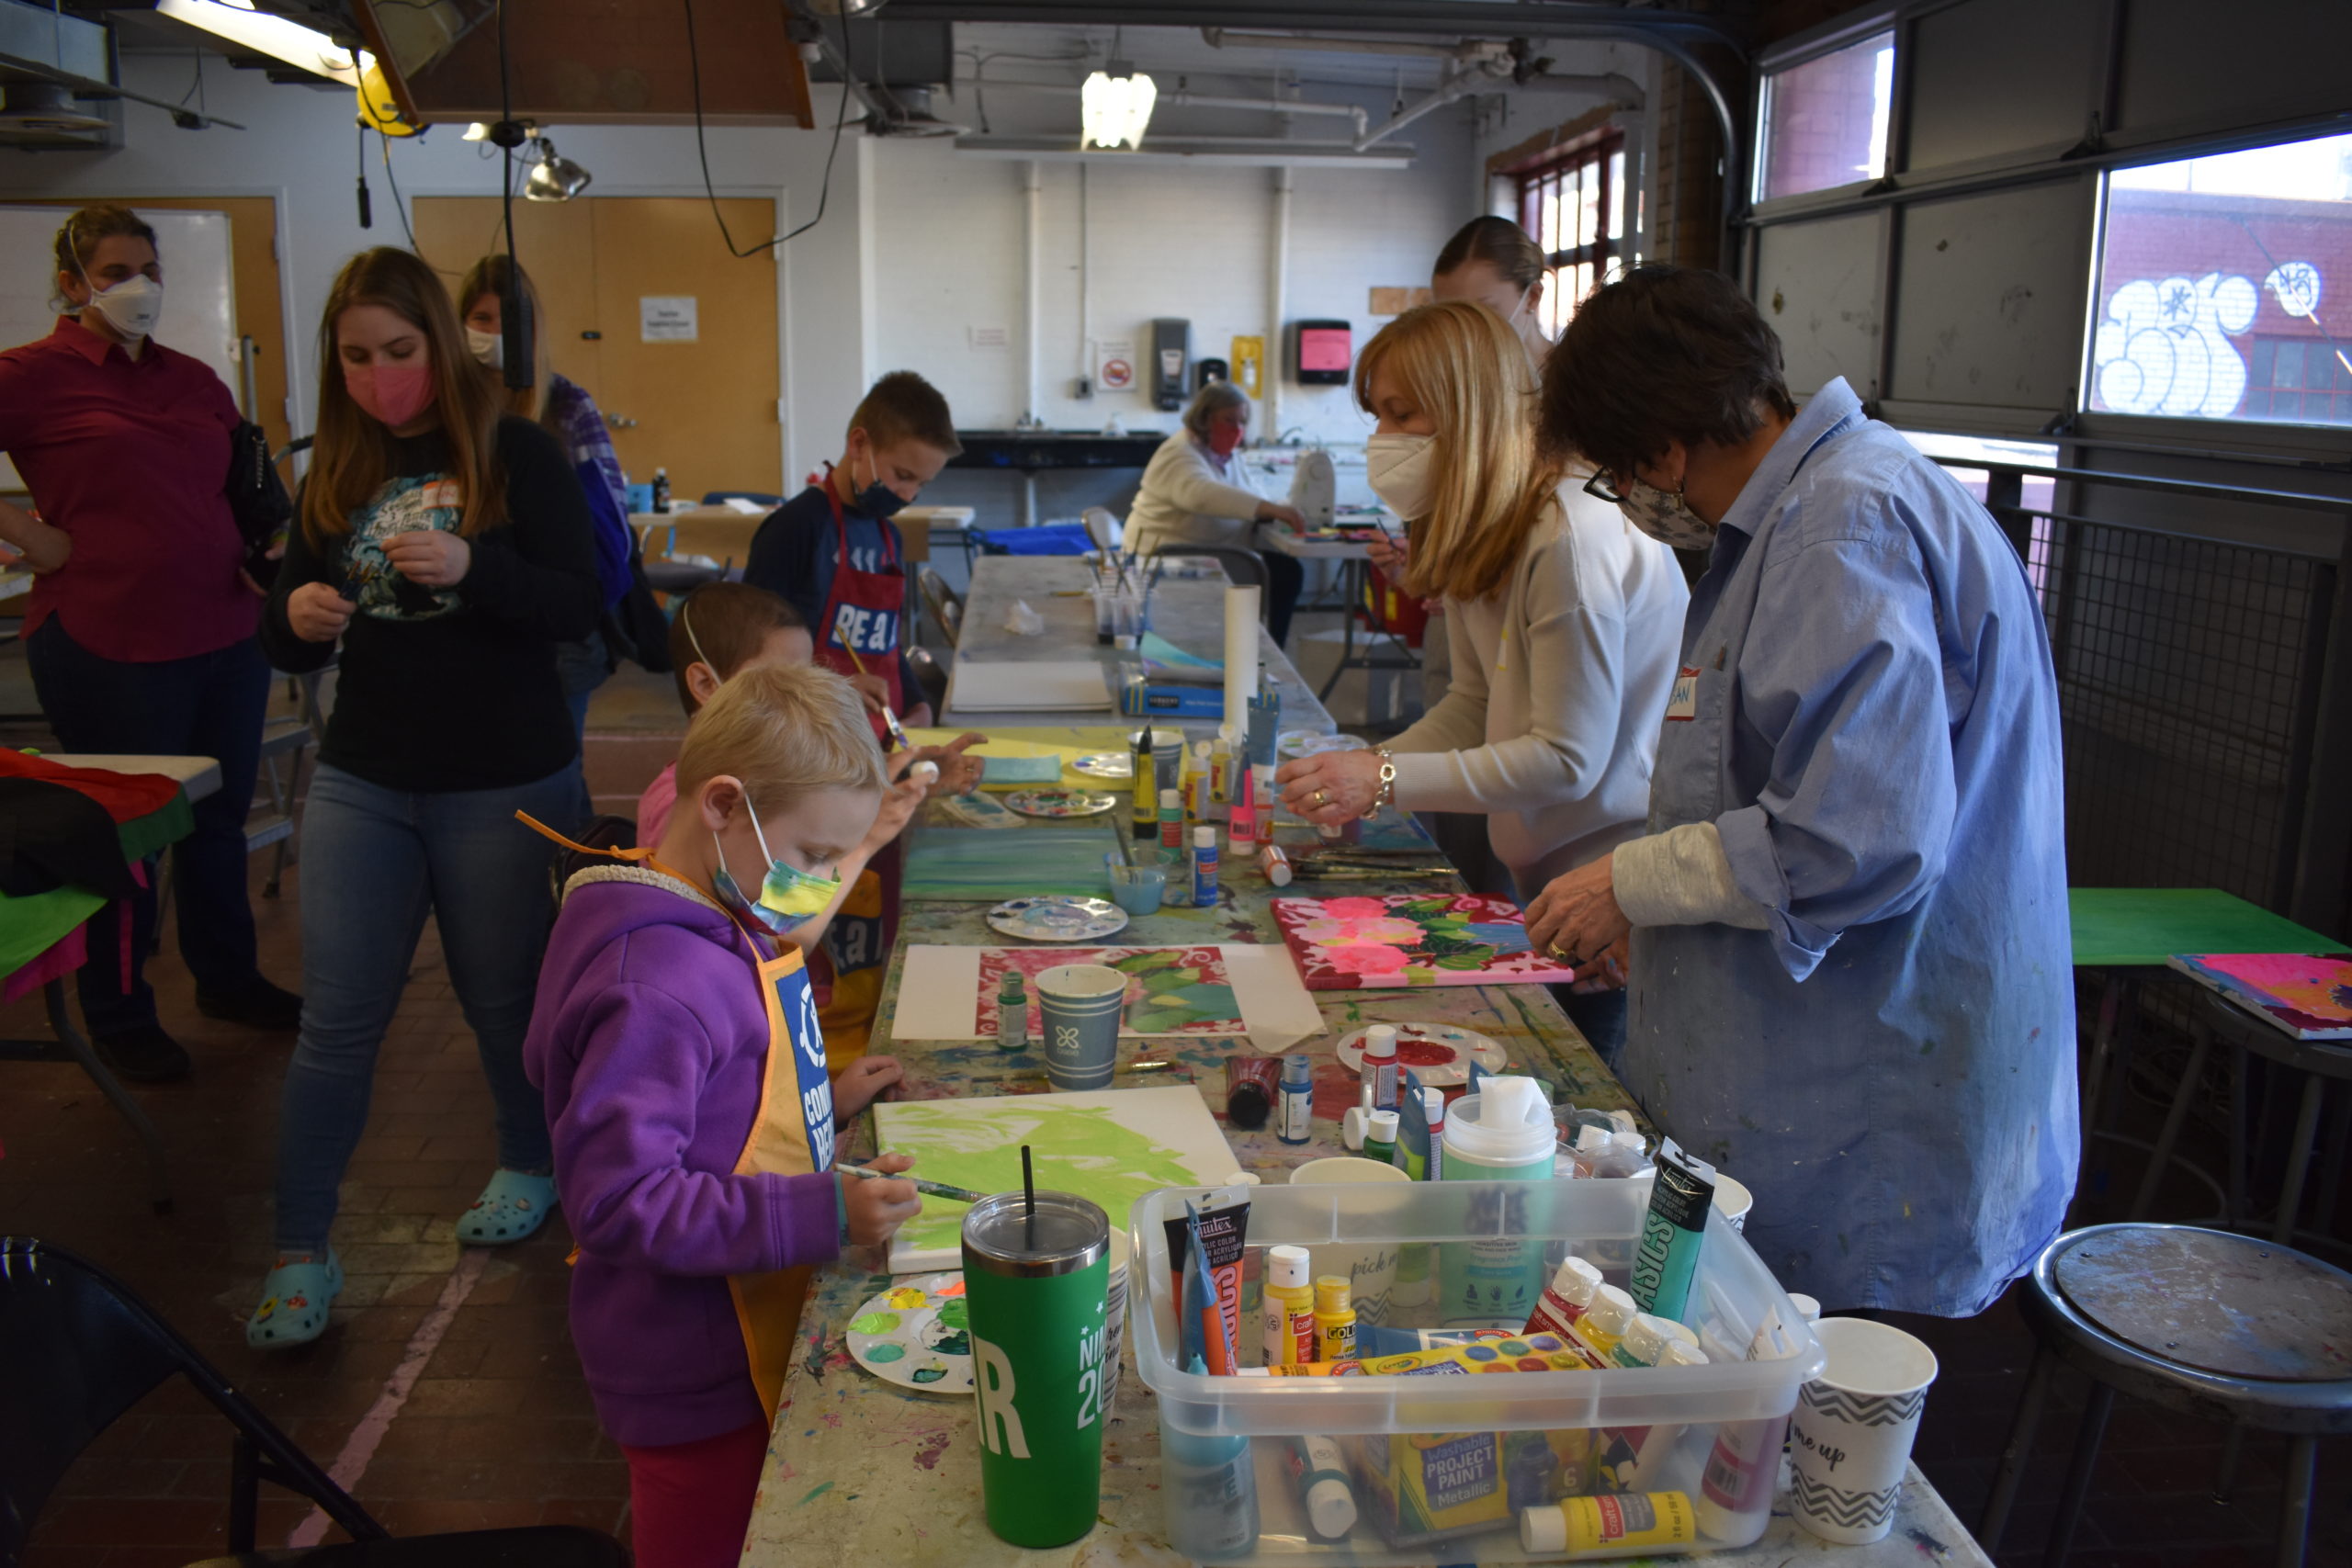 A group of children and adults in an art studio working on paintings